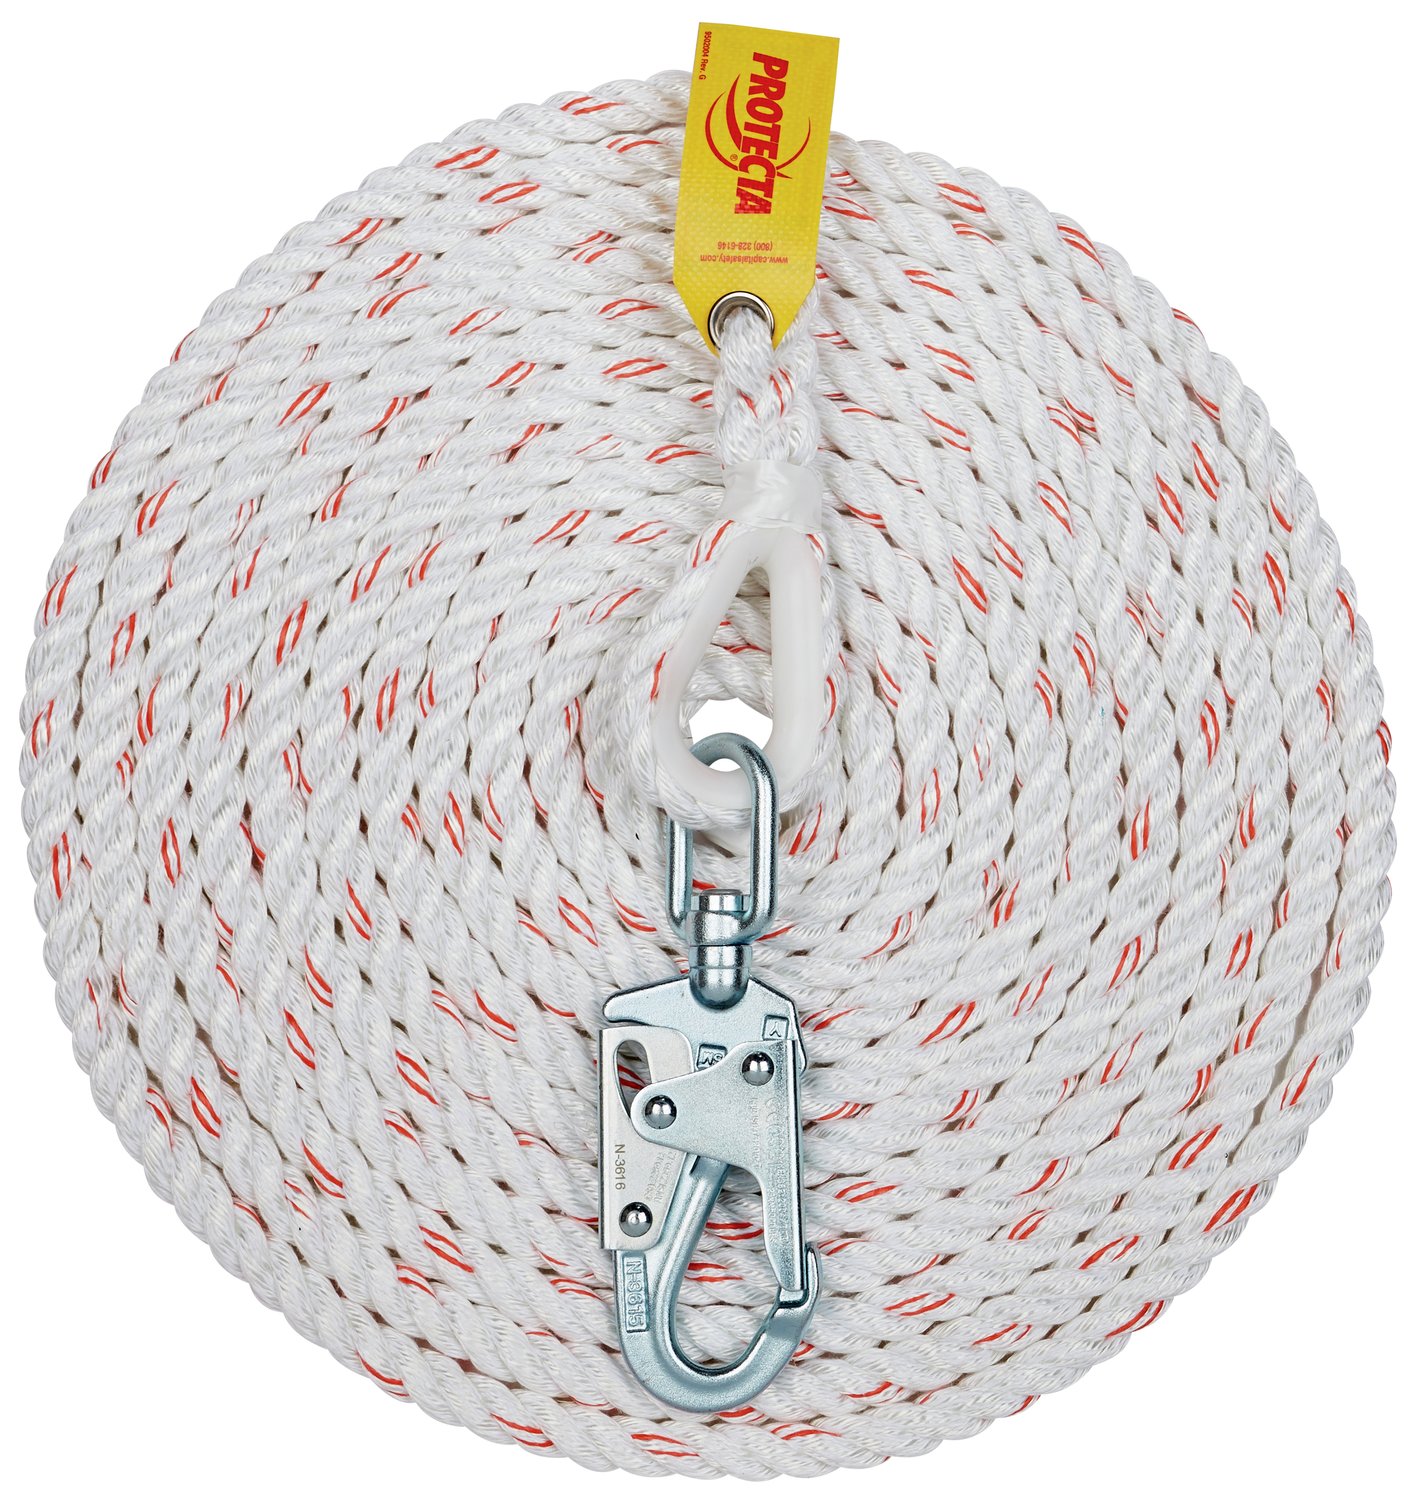 7100218794 - 3M PROTECTA PRO Rope Lifeline with Snap Hook 1299998, 1 EA